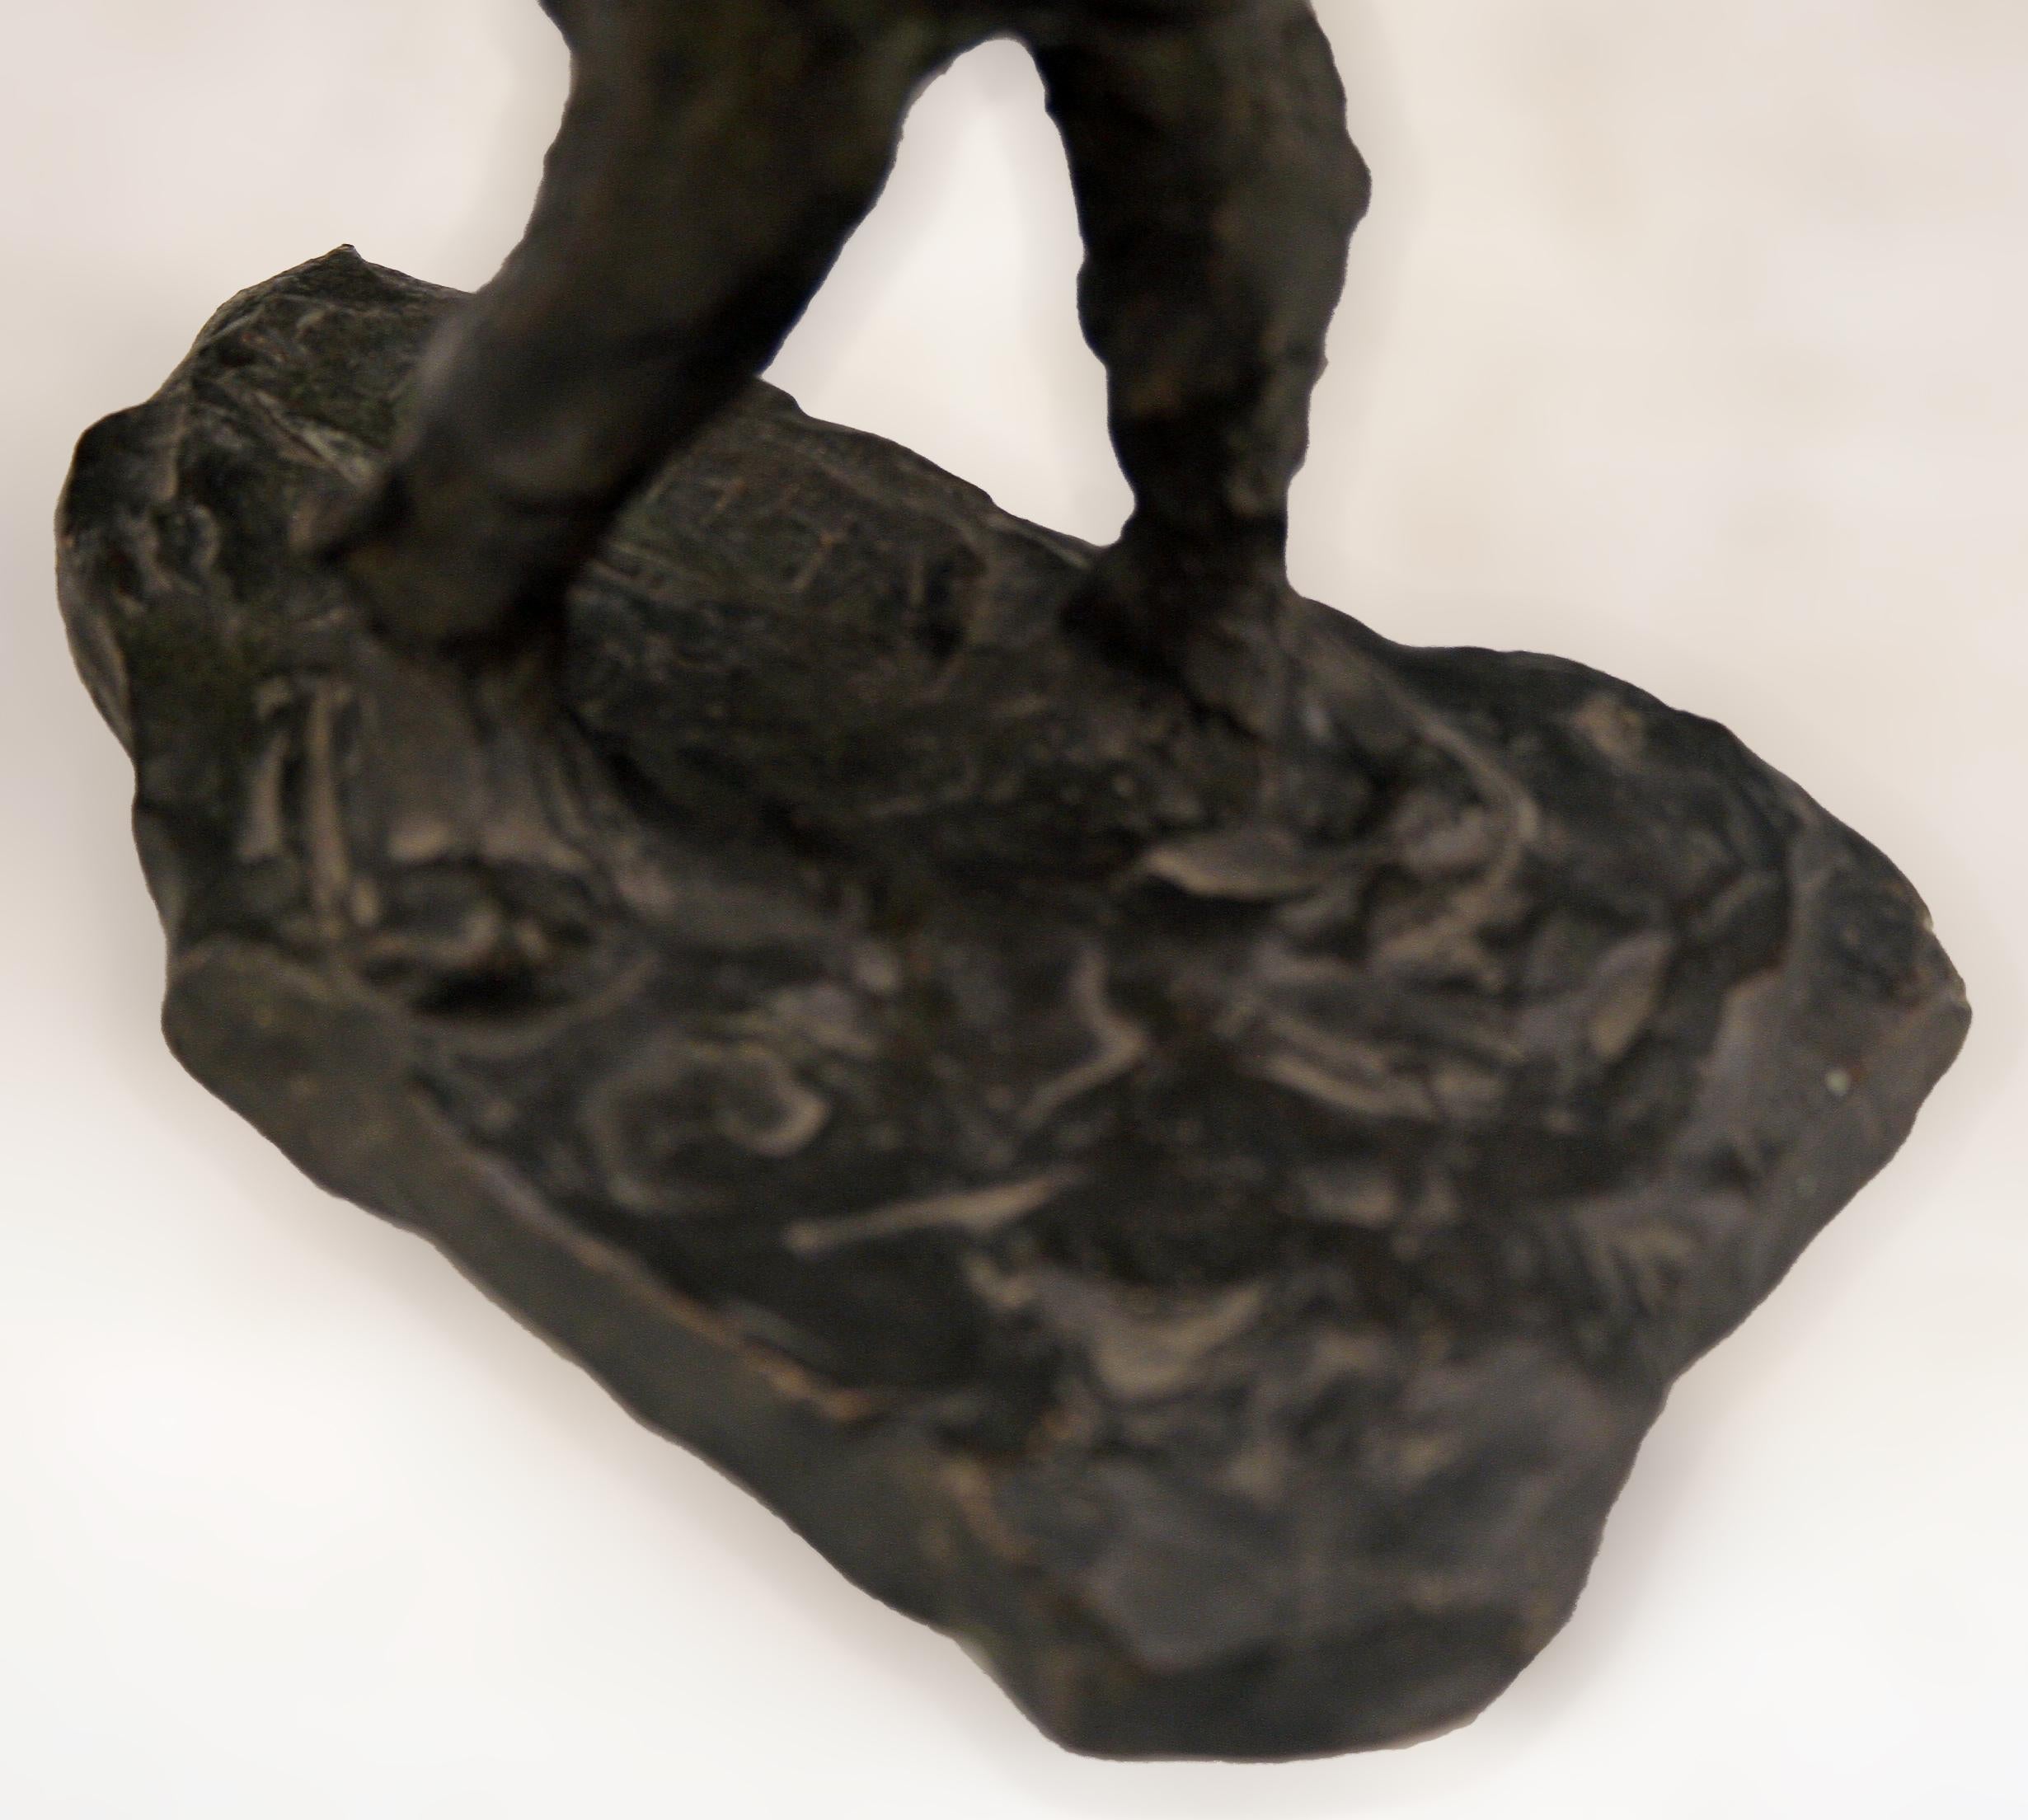 Molded Early 20th Century Bronze Sculpture of Carrying Man by Belgian Sculptor Demanet For Sale